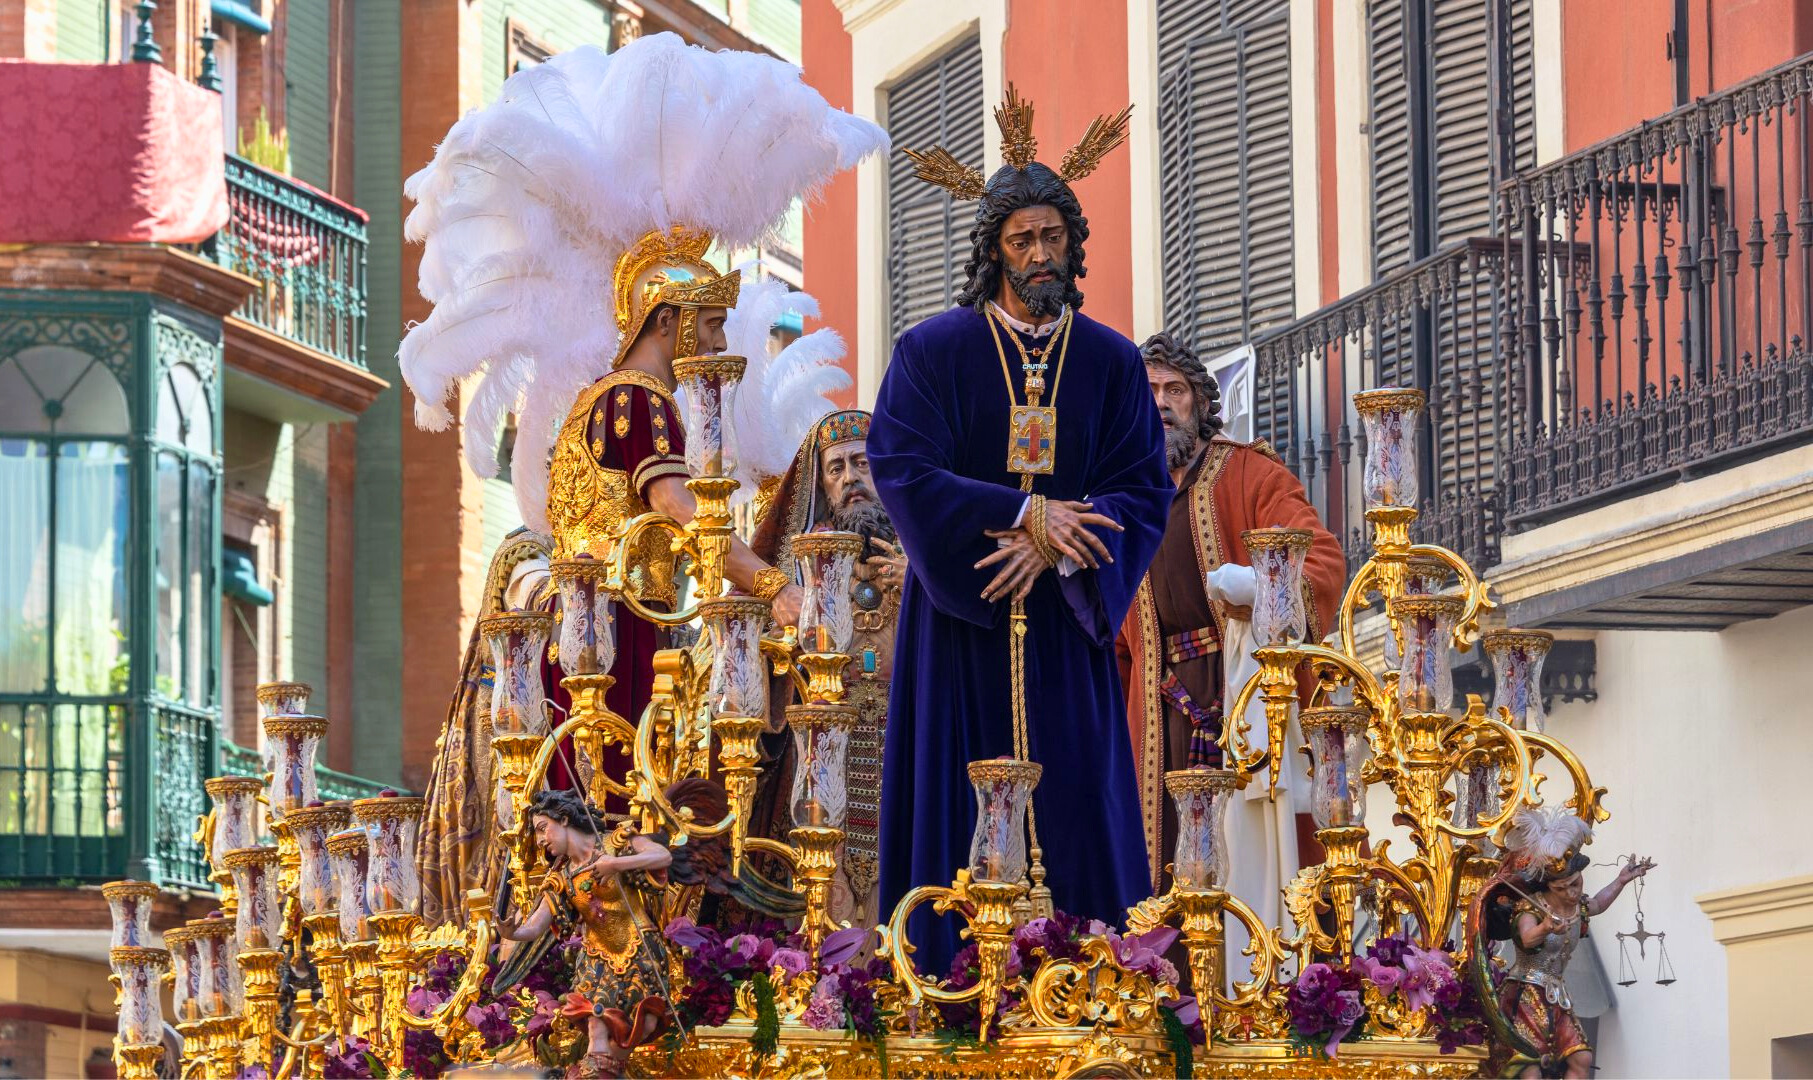 Procession through the streets of Andalusia